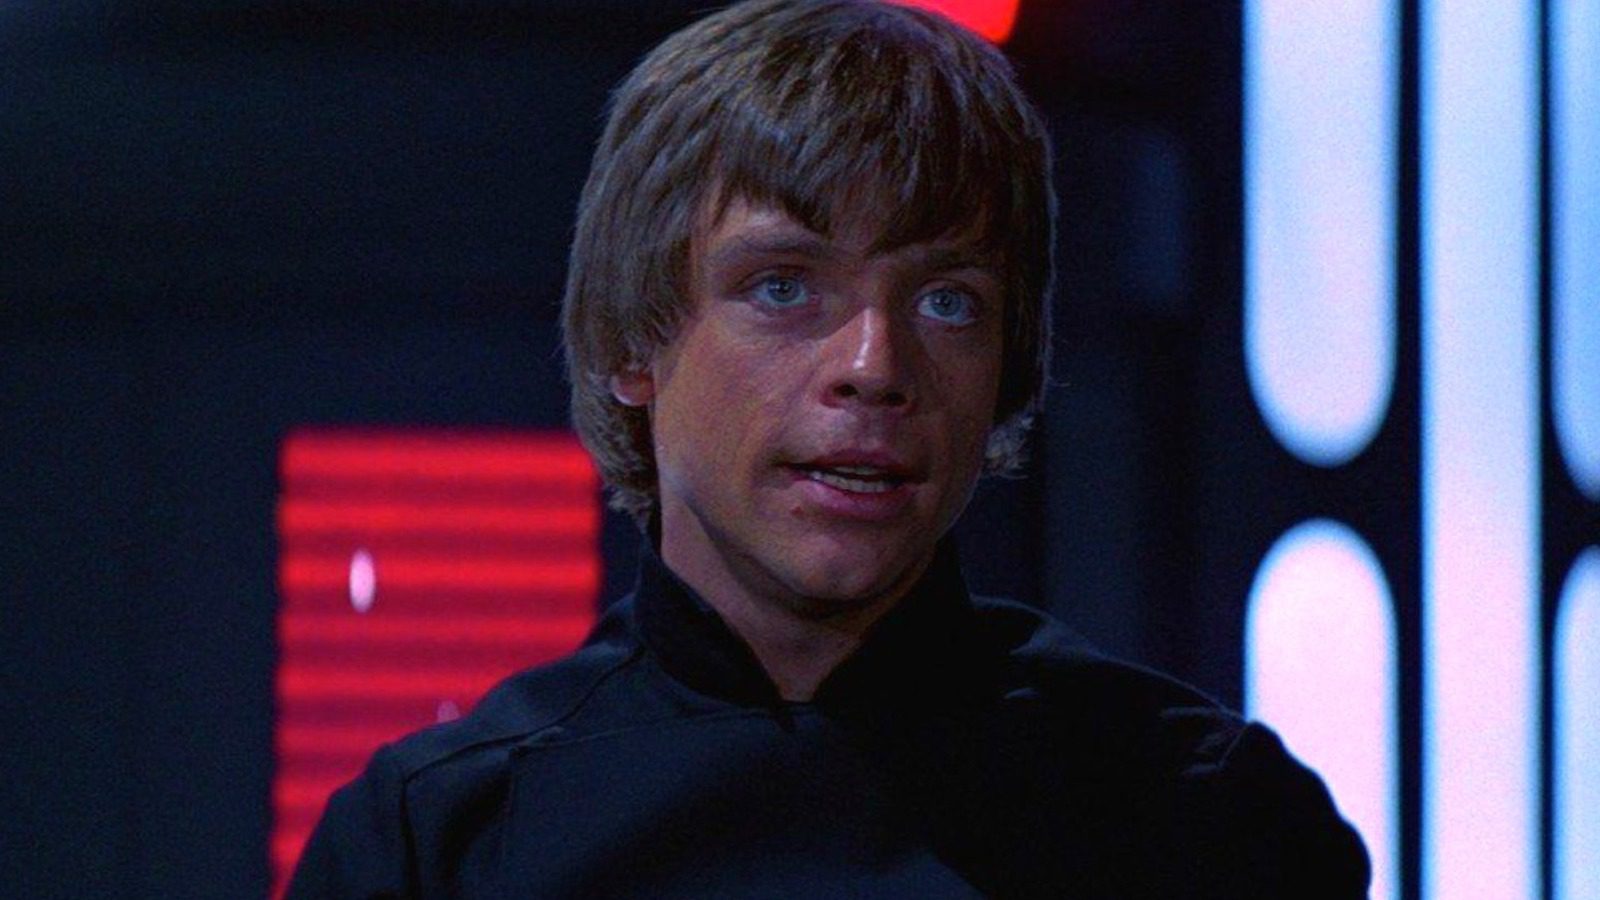 This Star Wars Theory Argues The Darksaber Actually Belongs To Luke Skywalker